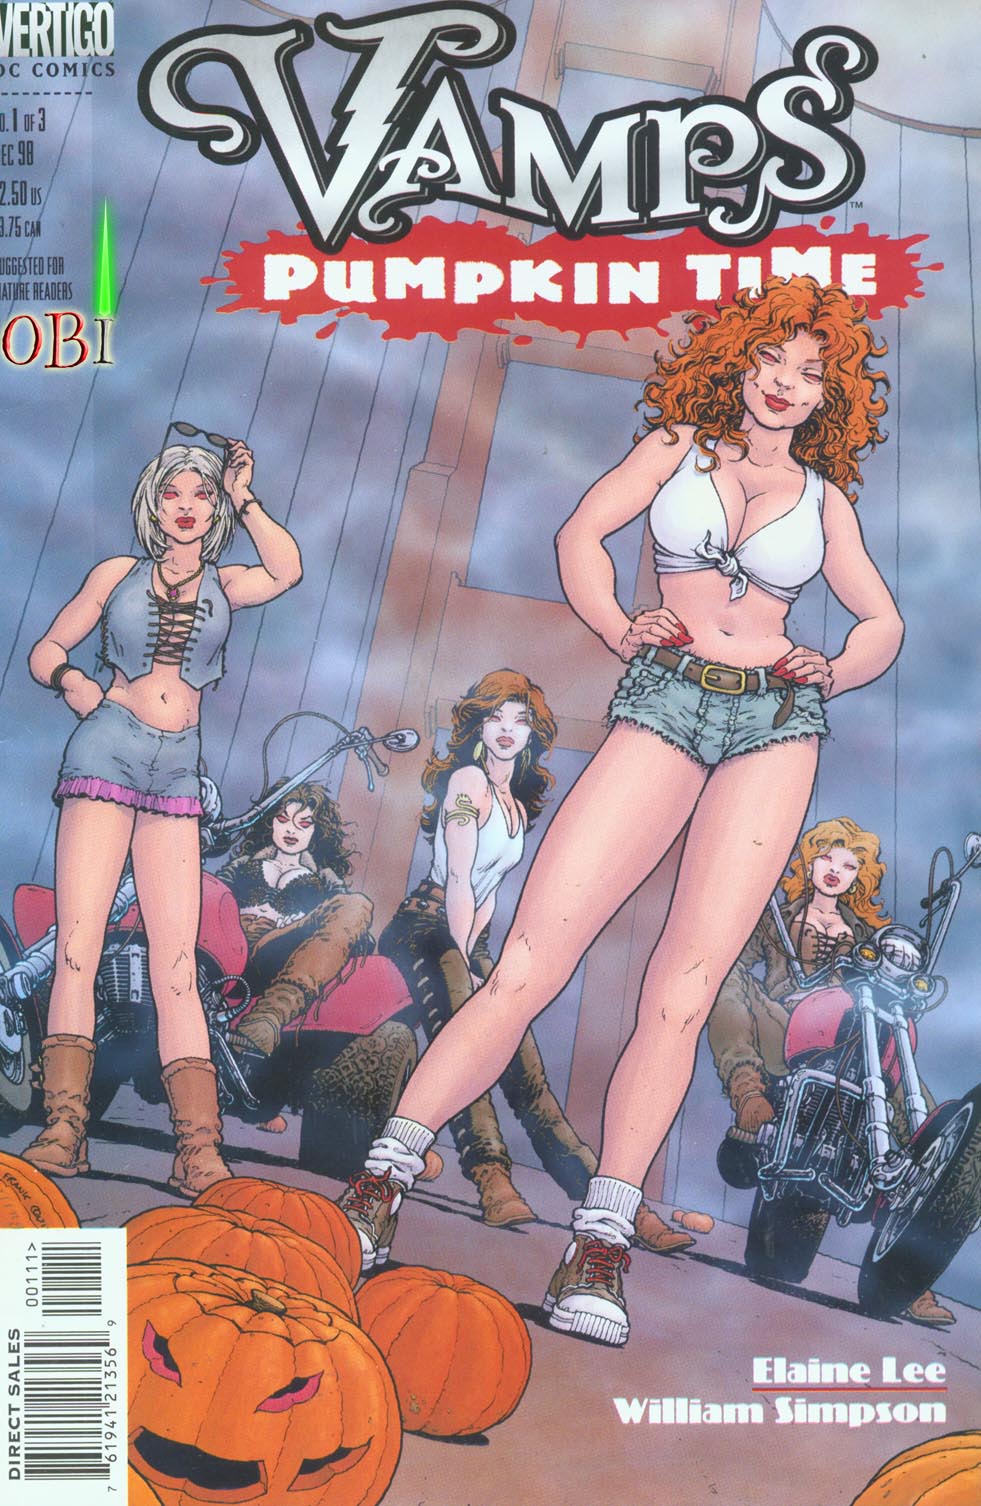 Read online Vamps: Pumpkin Time comic -  Issue #1 - 1